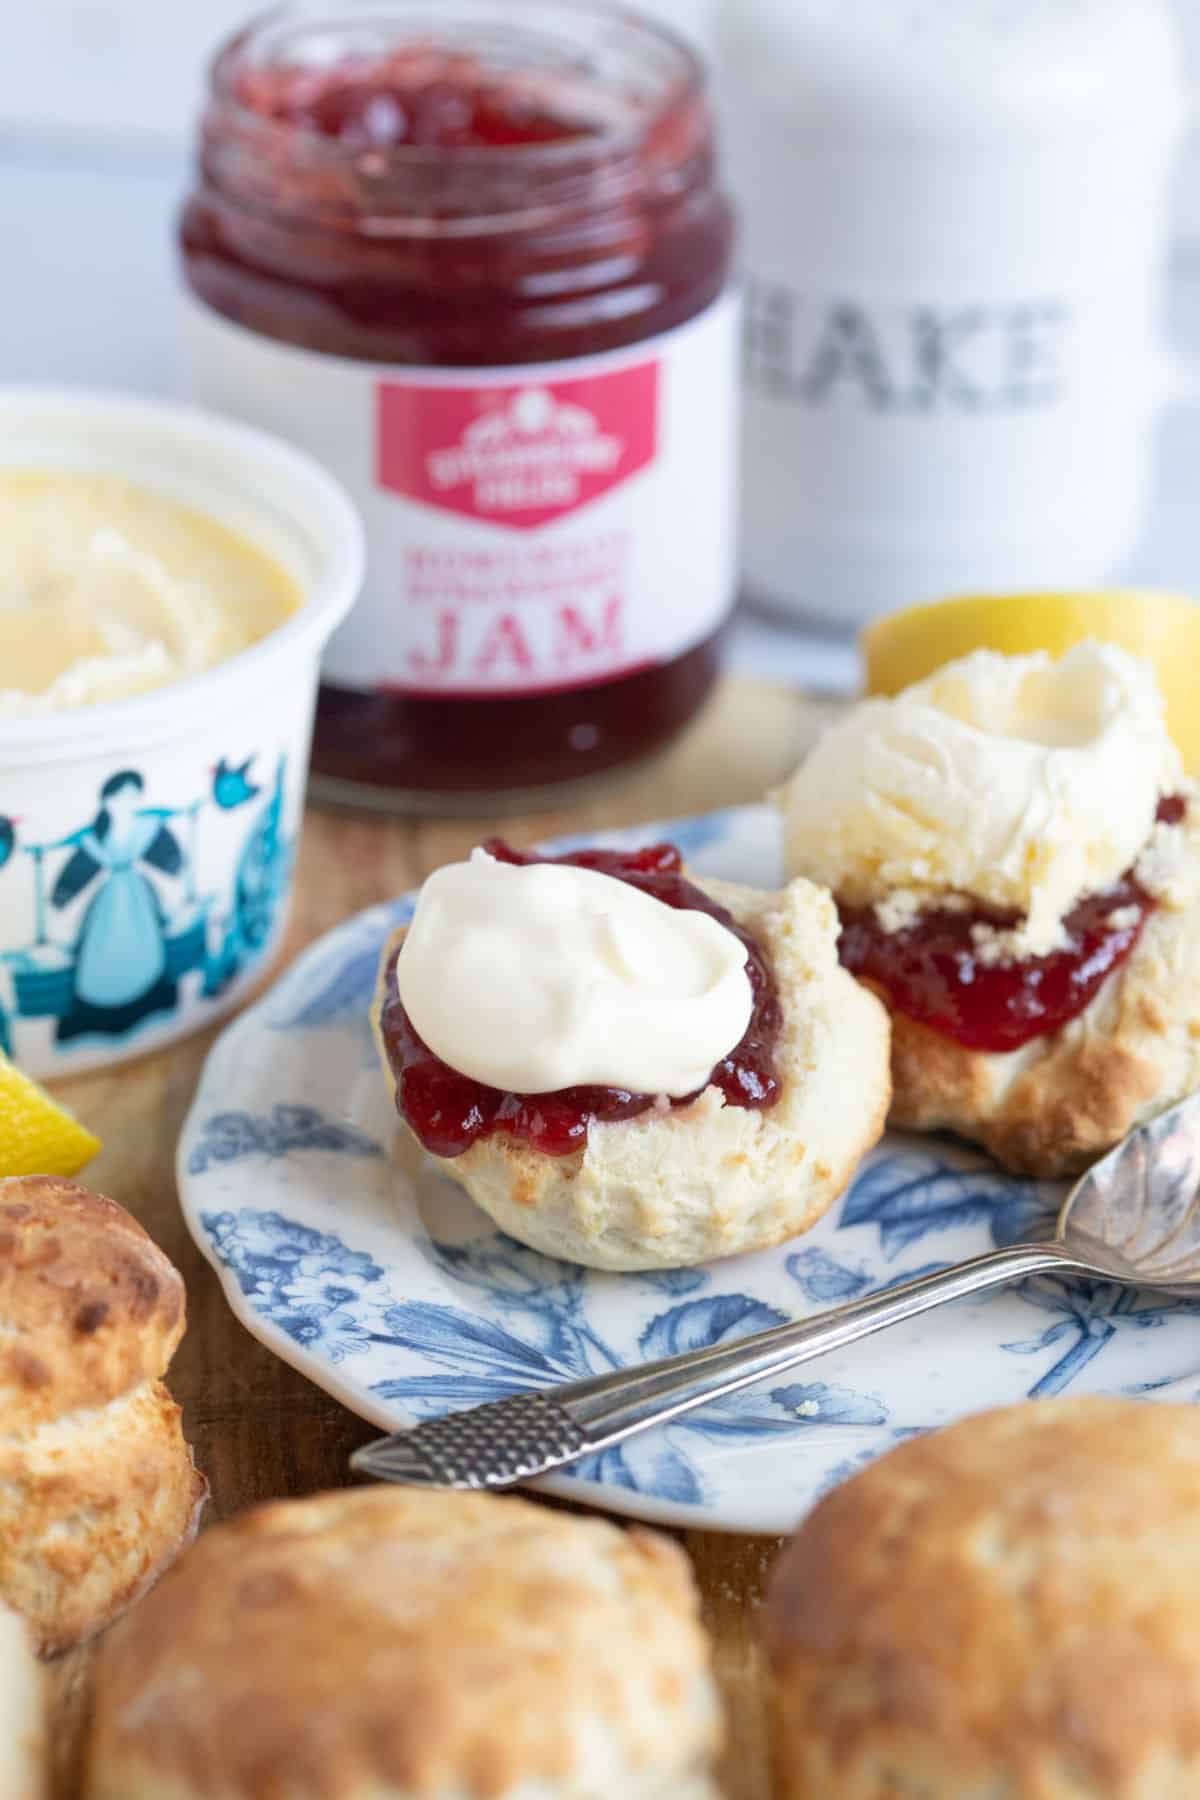 Air fryer scone on a plate with jam and clotted cream.